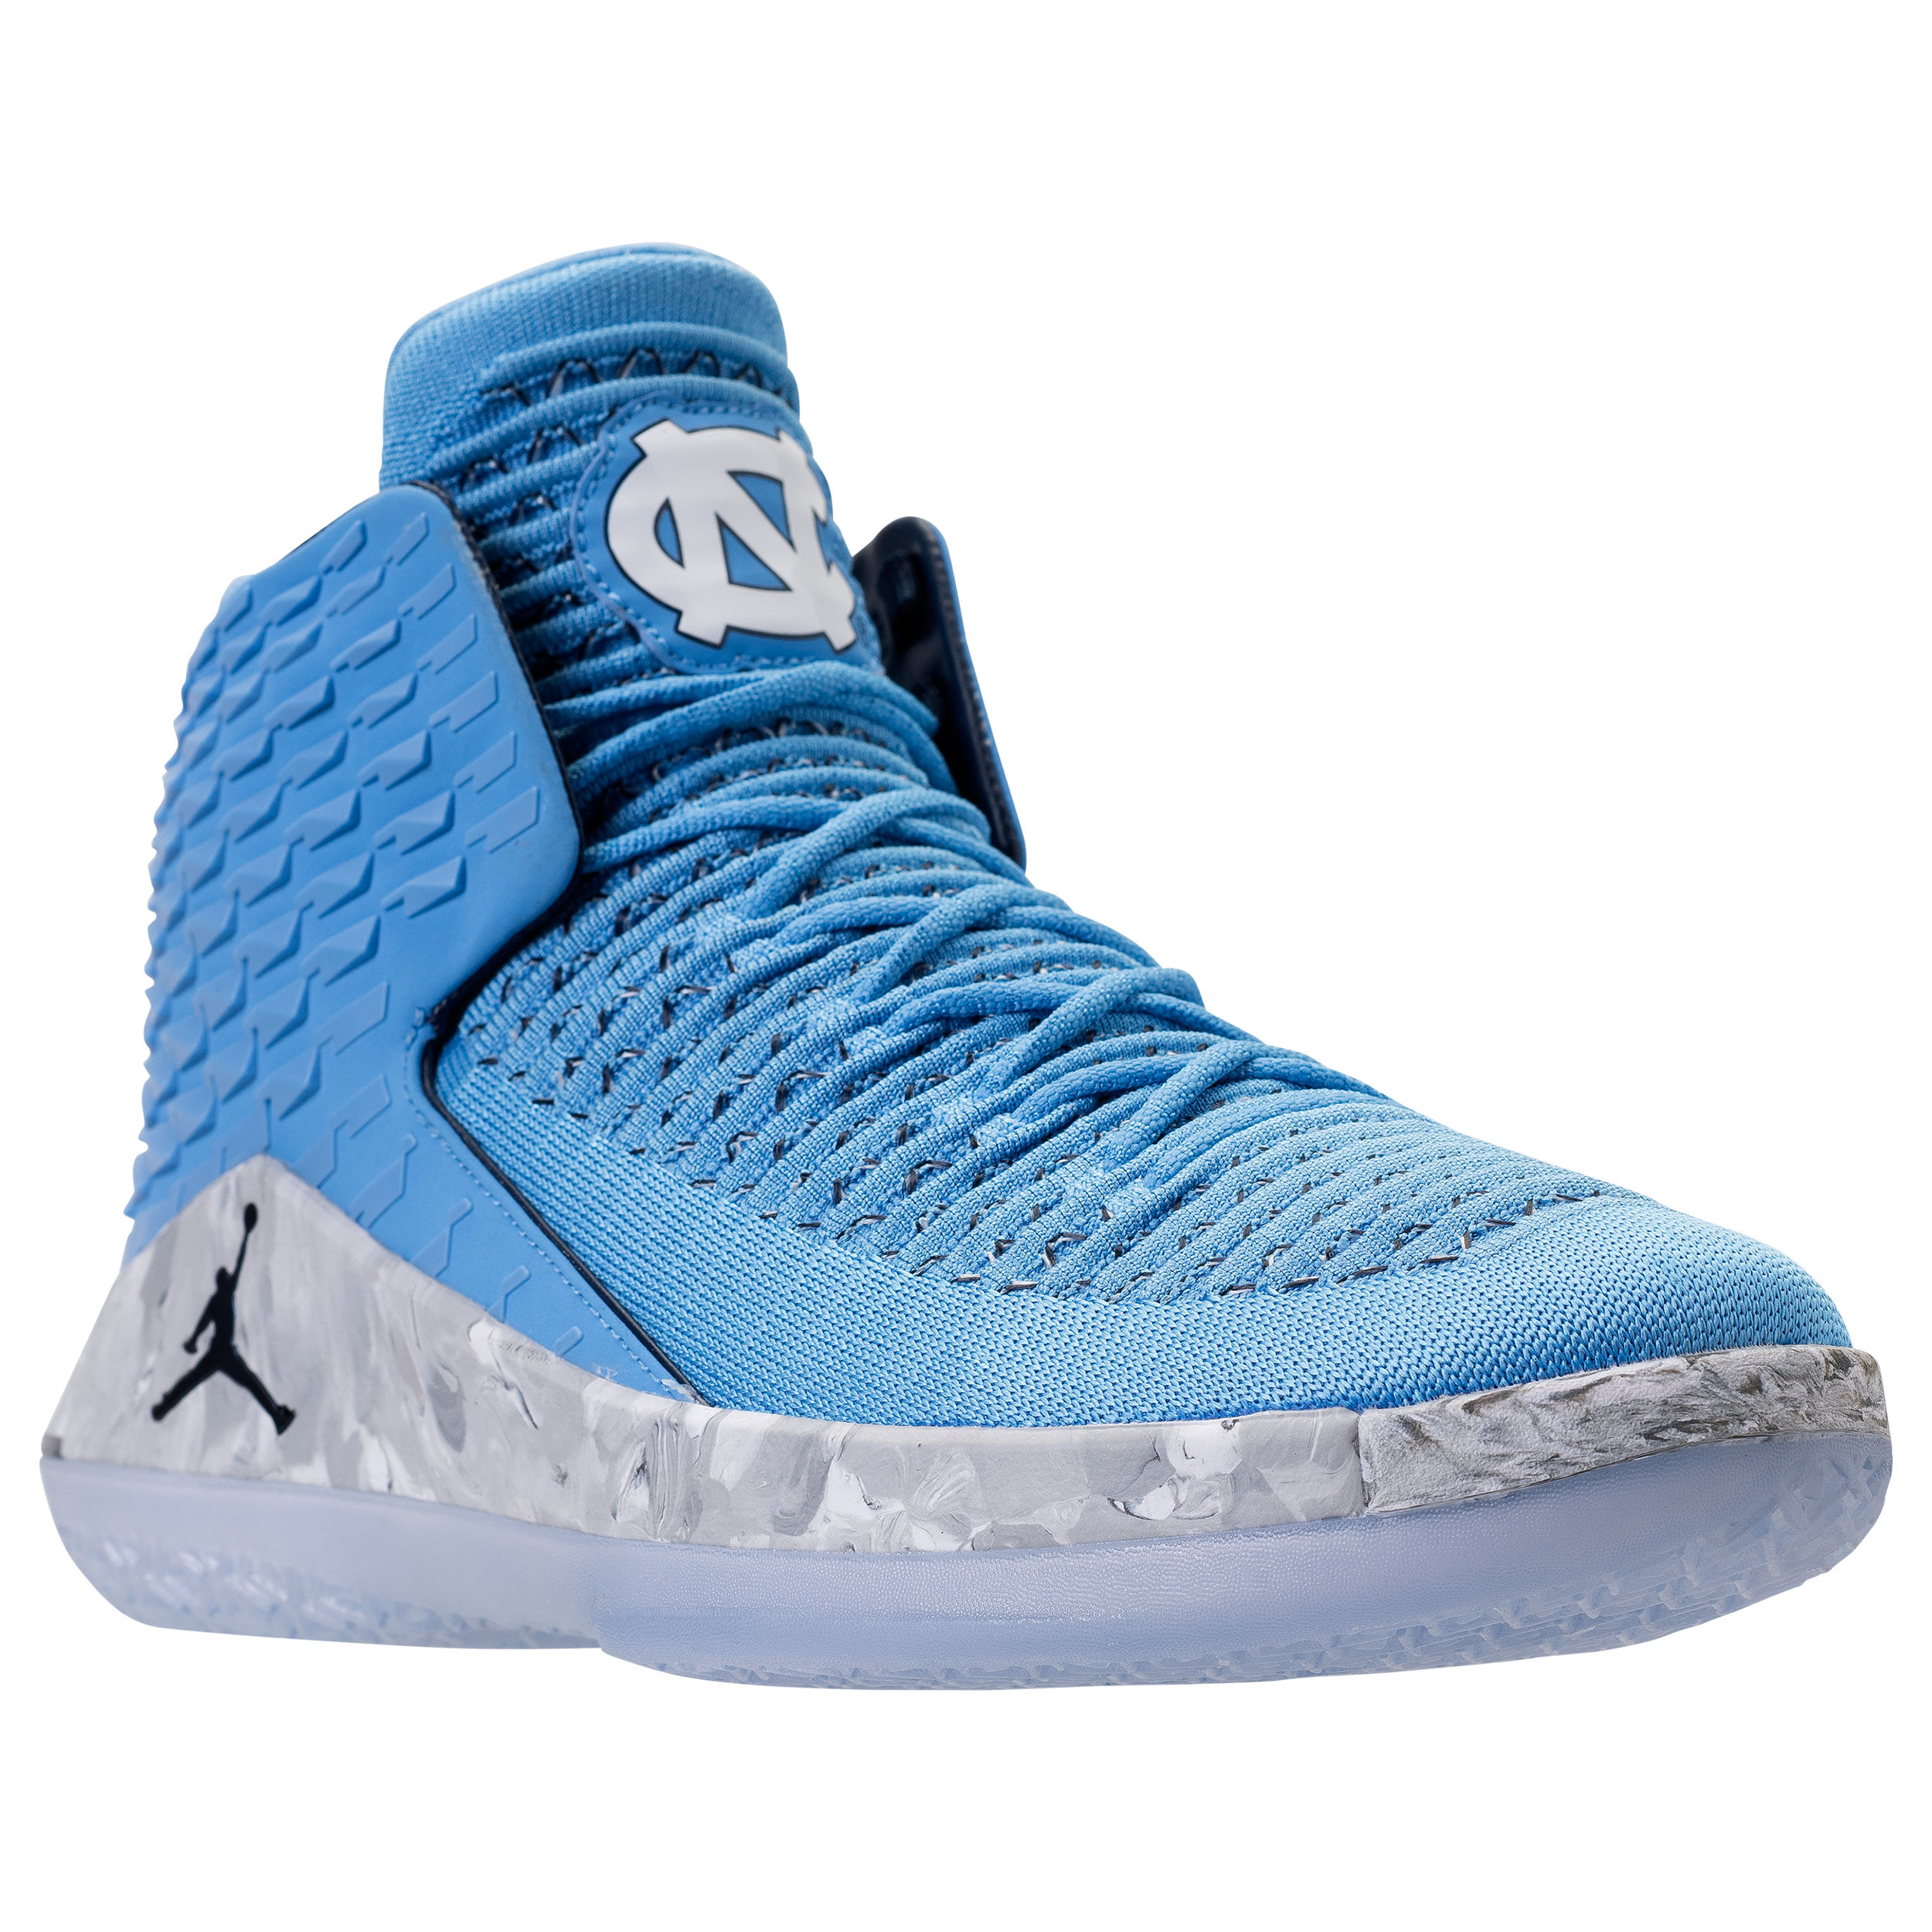 unc basketball shoes for sale